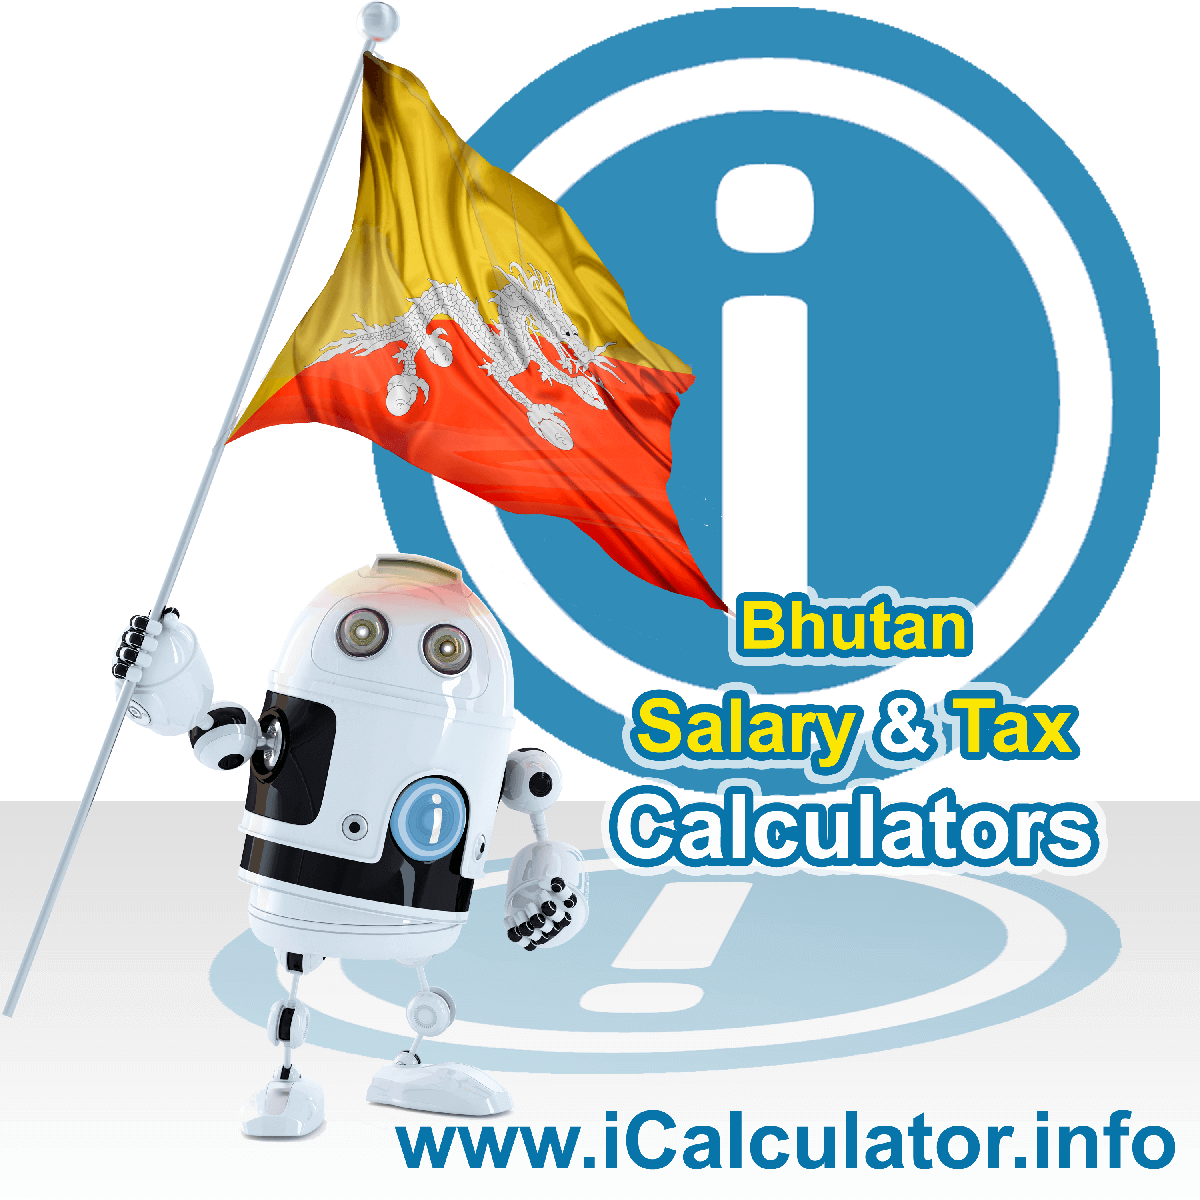 Bhutan Tax Calculator. This image shows the Bhutan flag and information relating to the tax formula for the Bhutan Salary Calculator